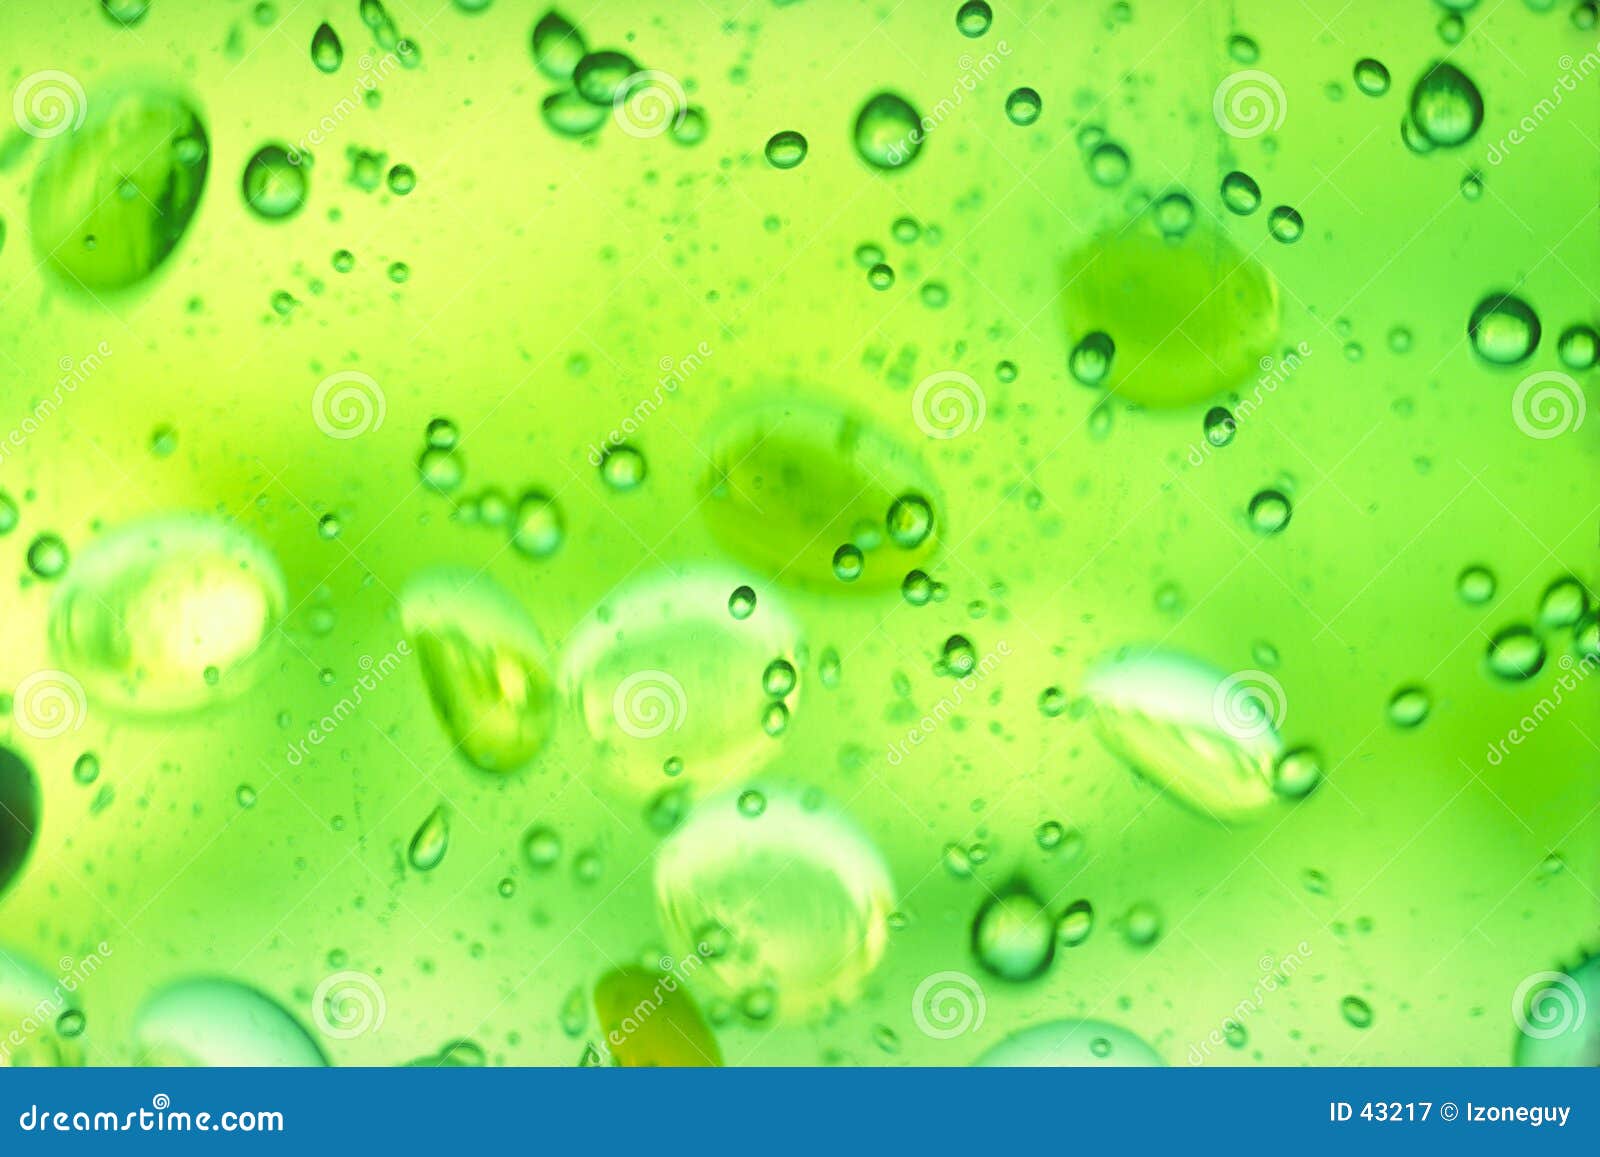 Active Green Bubbles stock image. Image of floating, bubble - 43217